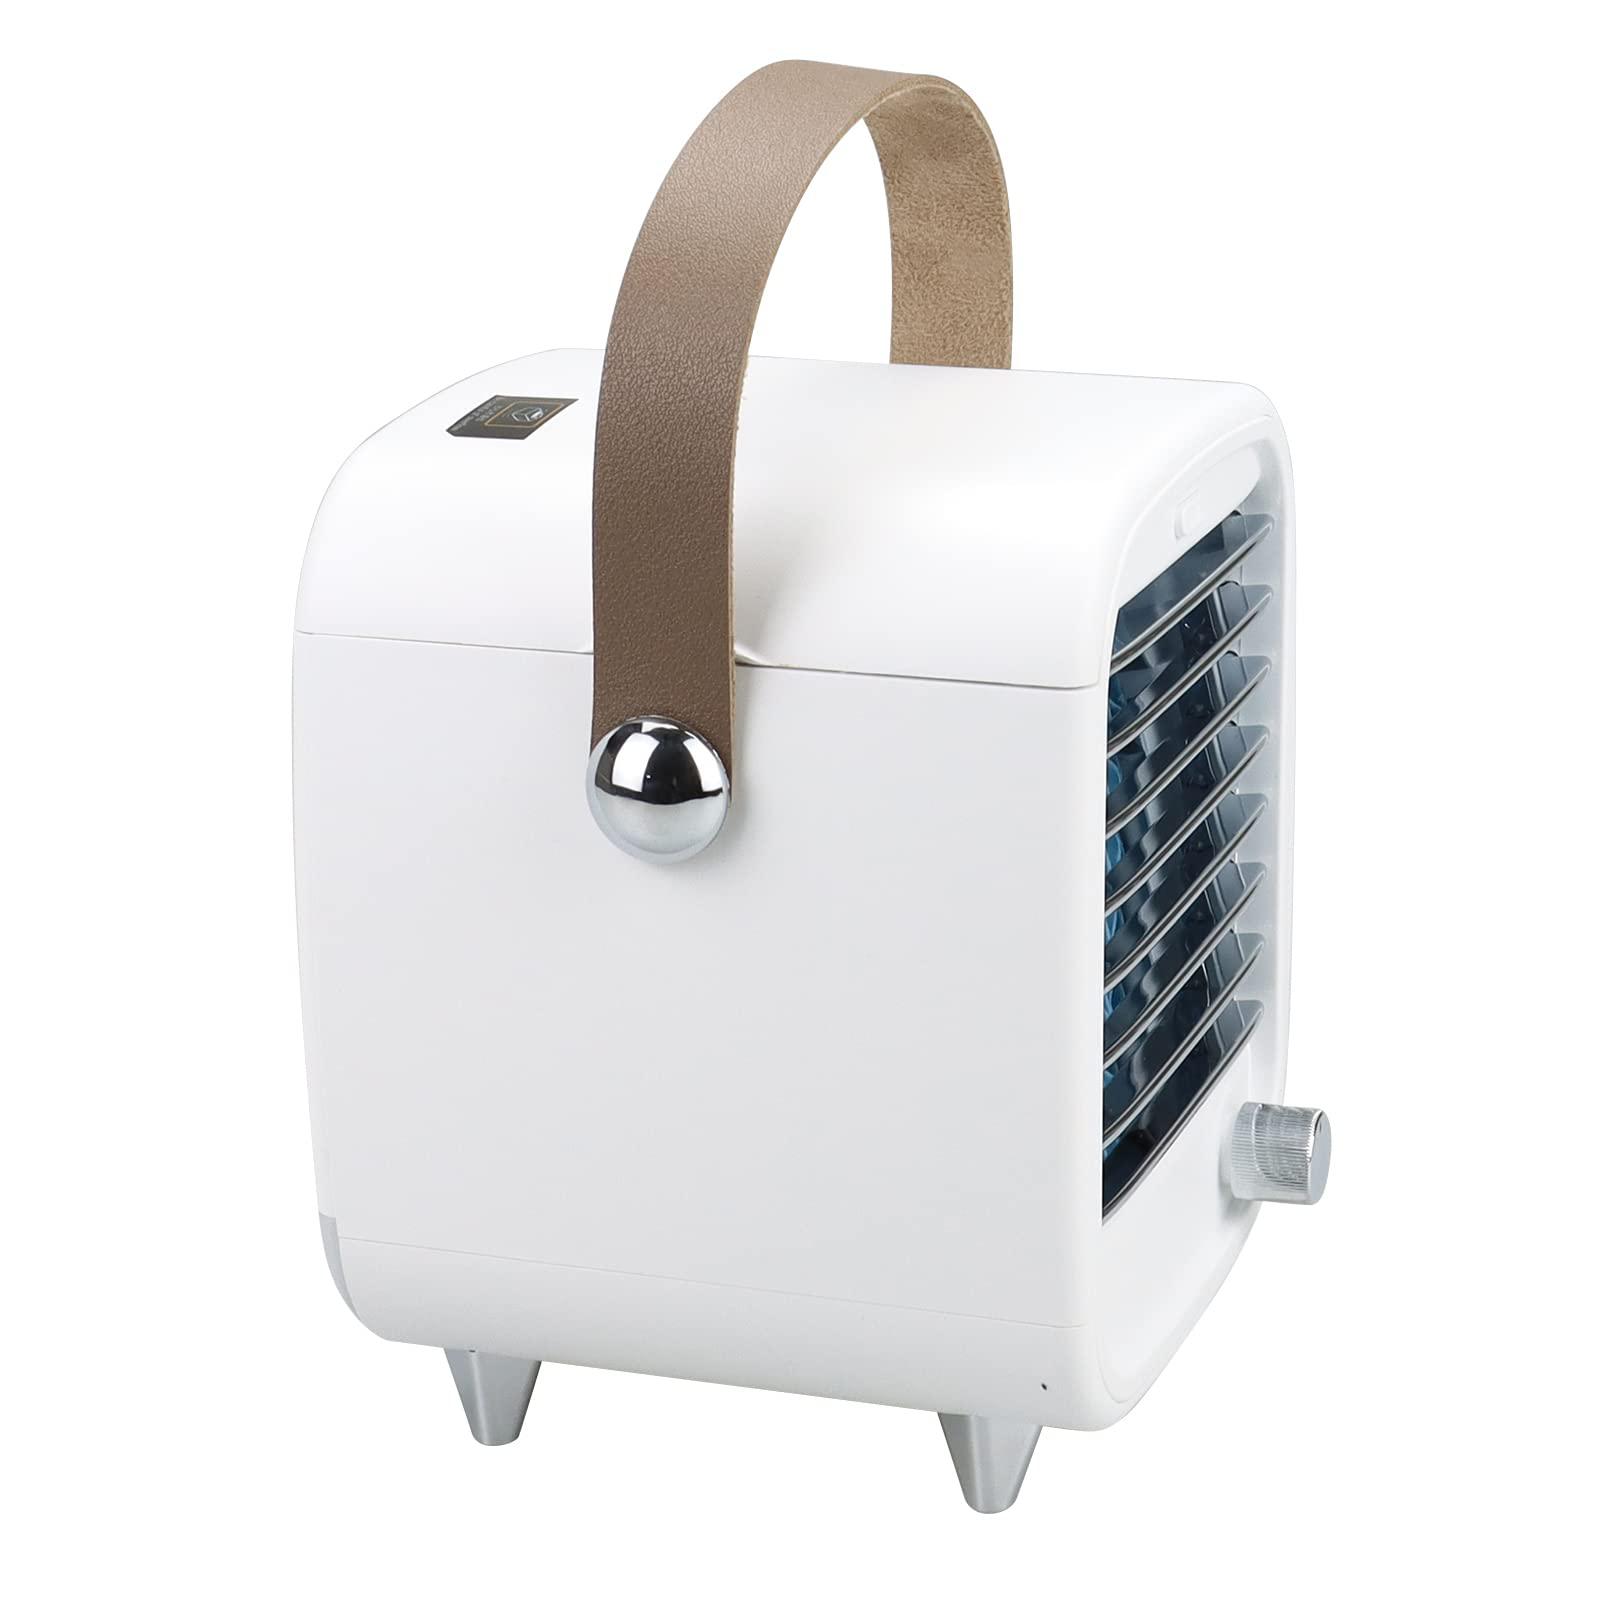 TERUIPE portable air conditioner, upgraded 3 in 1 personal air conditioner cooling fan, small evaporative air cooler, usb powered ene